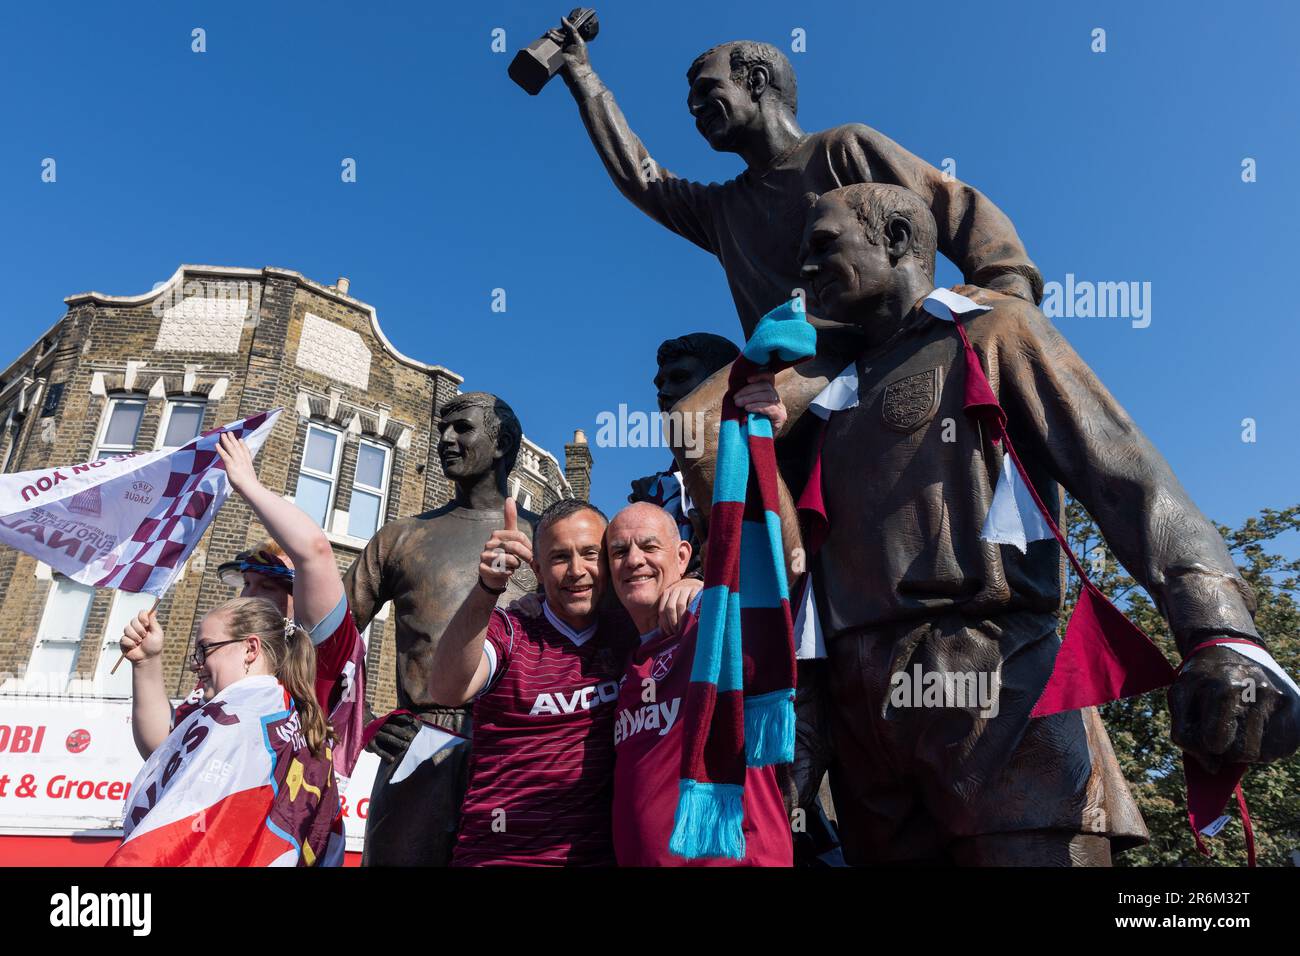 London, UK. 8th June, 2023. West Ham United supporters celebrate in front of The Champions sculpture close to the club's former Boleyn Ground stadium at Upton Park in advance of a UEFA Europa Conference League victory parade. West Ham defeated ACF Fiorentina in the UEFA Europa Conference League Final on 7 June, winning their first major trophy since 1980. Credit: Mark Kerrison/Alamy Live News Stock Photo